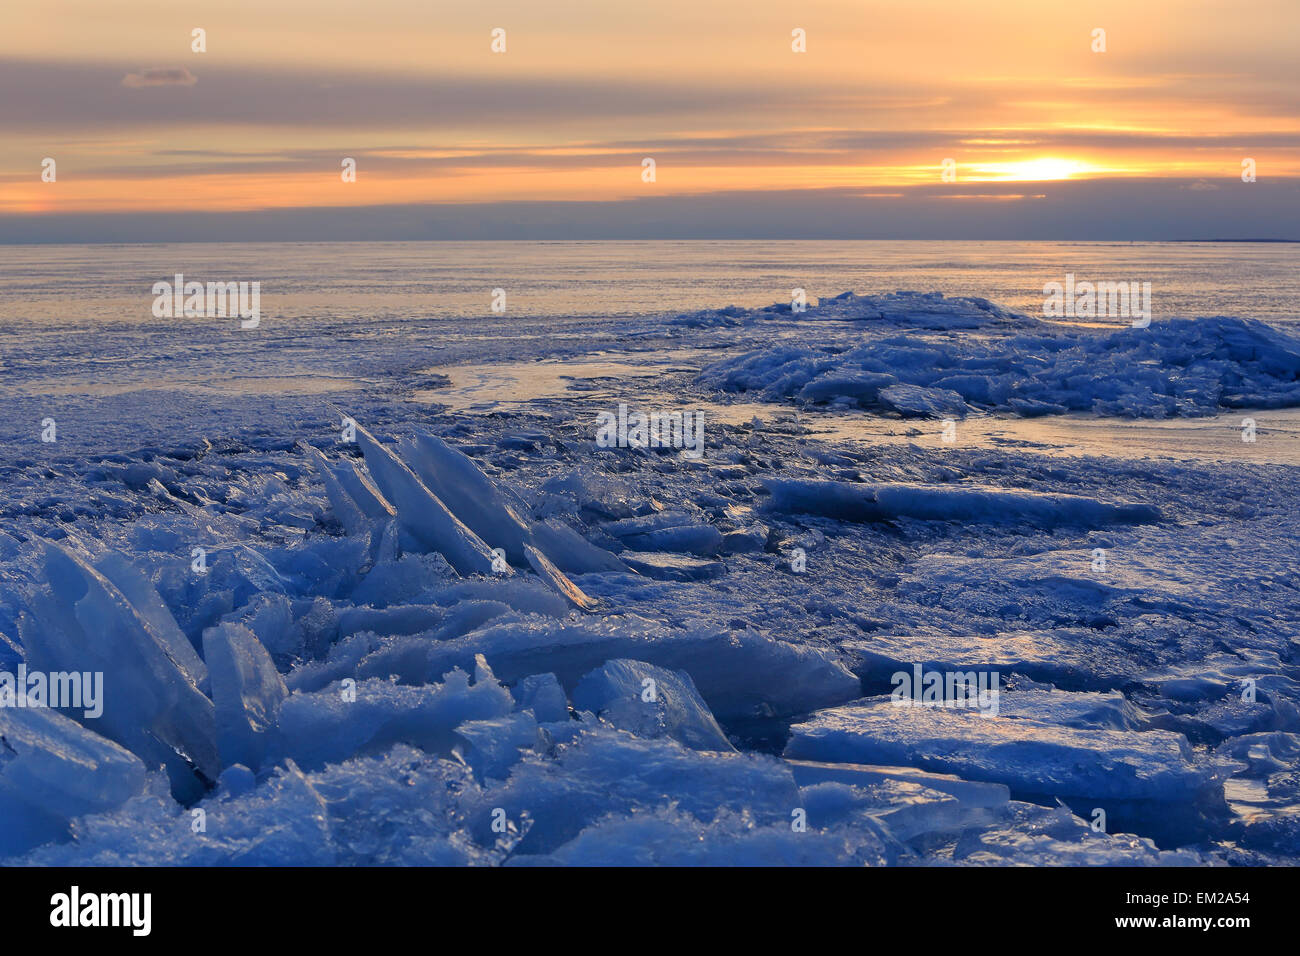 Sunset on the Gulf of Finland, St. Petersburg, Russia Stock Photo